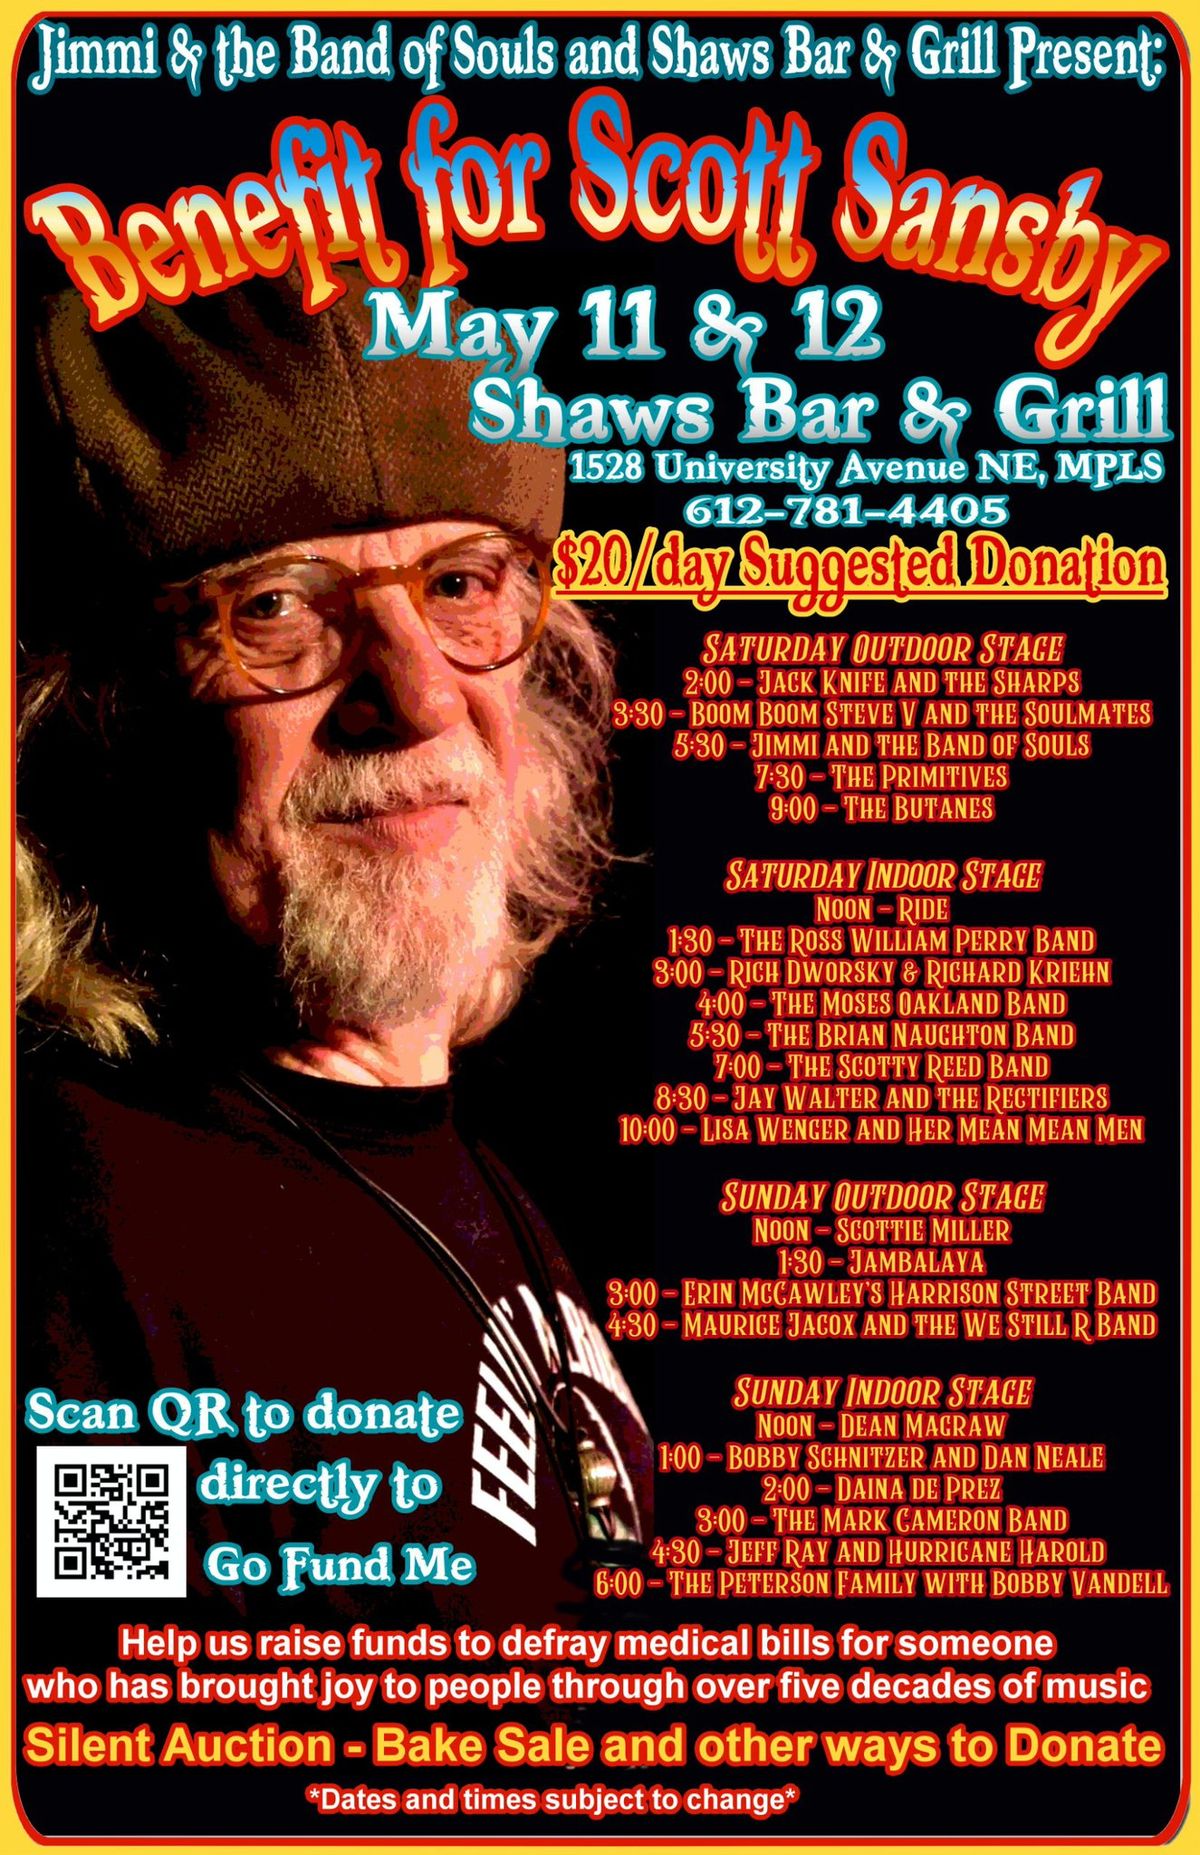 Benefit For Scott Sansby!